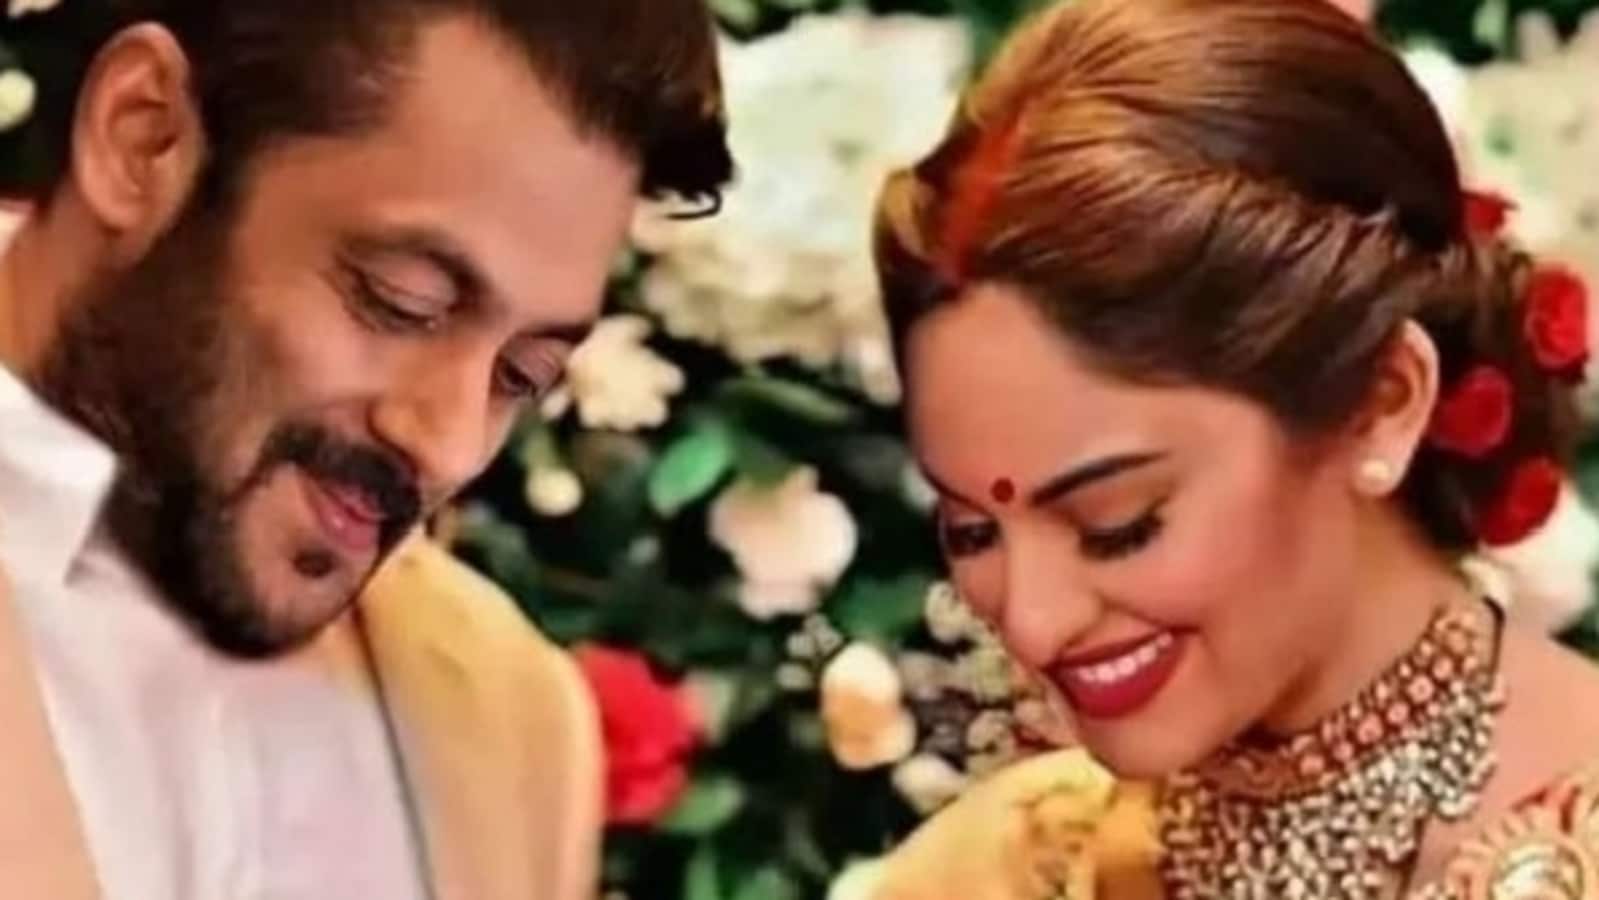 Porn Of Sonakshi On Xnxx - Salman, Sonakshi's fans are confused as fake pic shows them as a married  couple | Bollywood - Hindustan Times